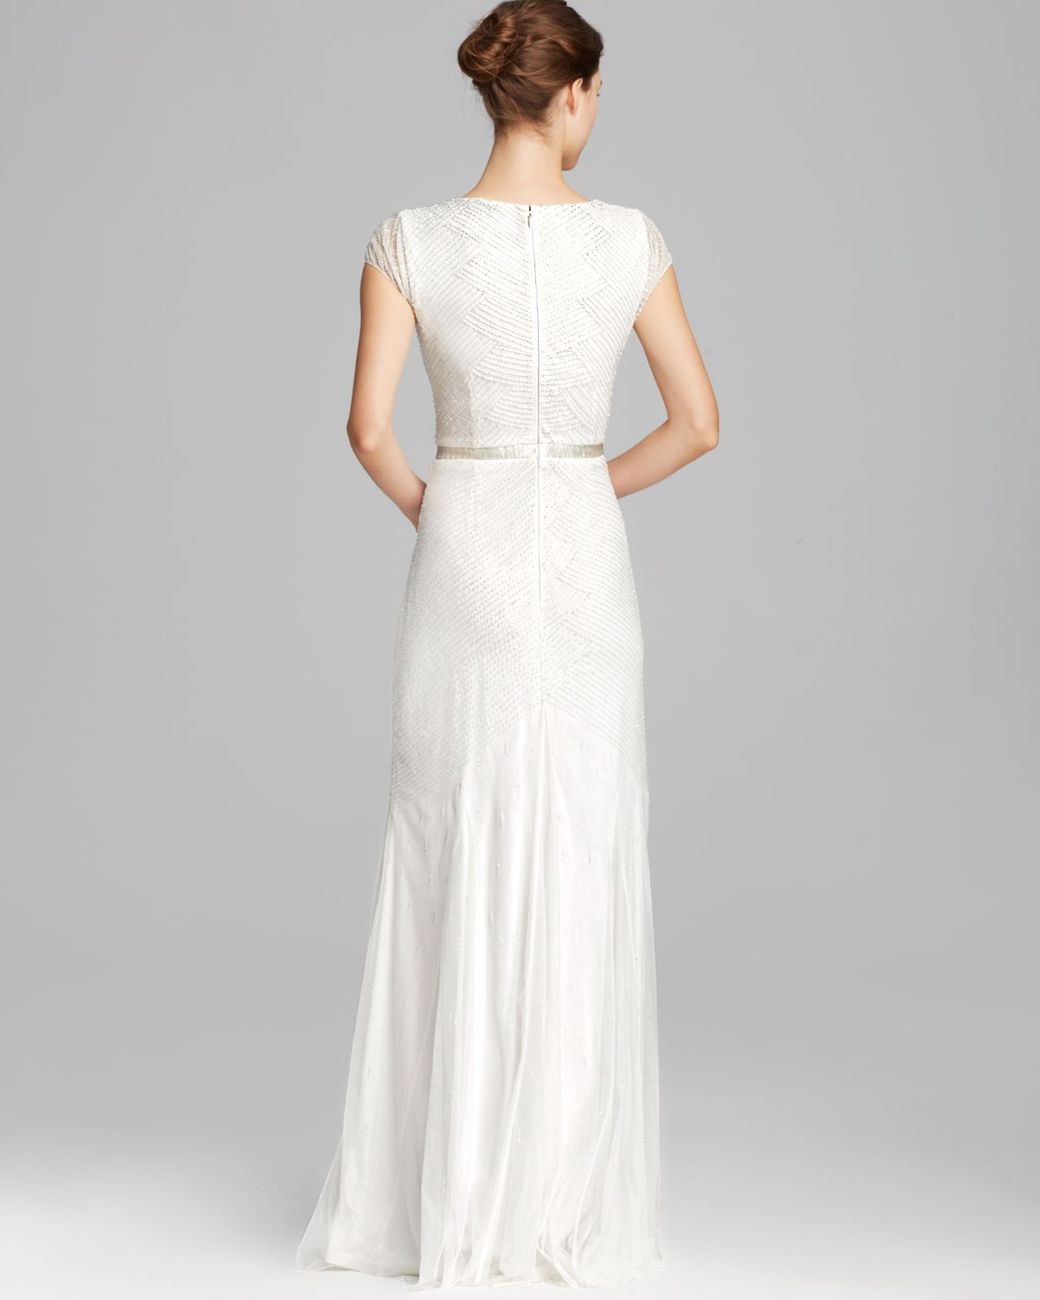 Adrianna Papell Gown - Cap Sleeve V Neck Beaded in White